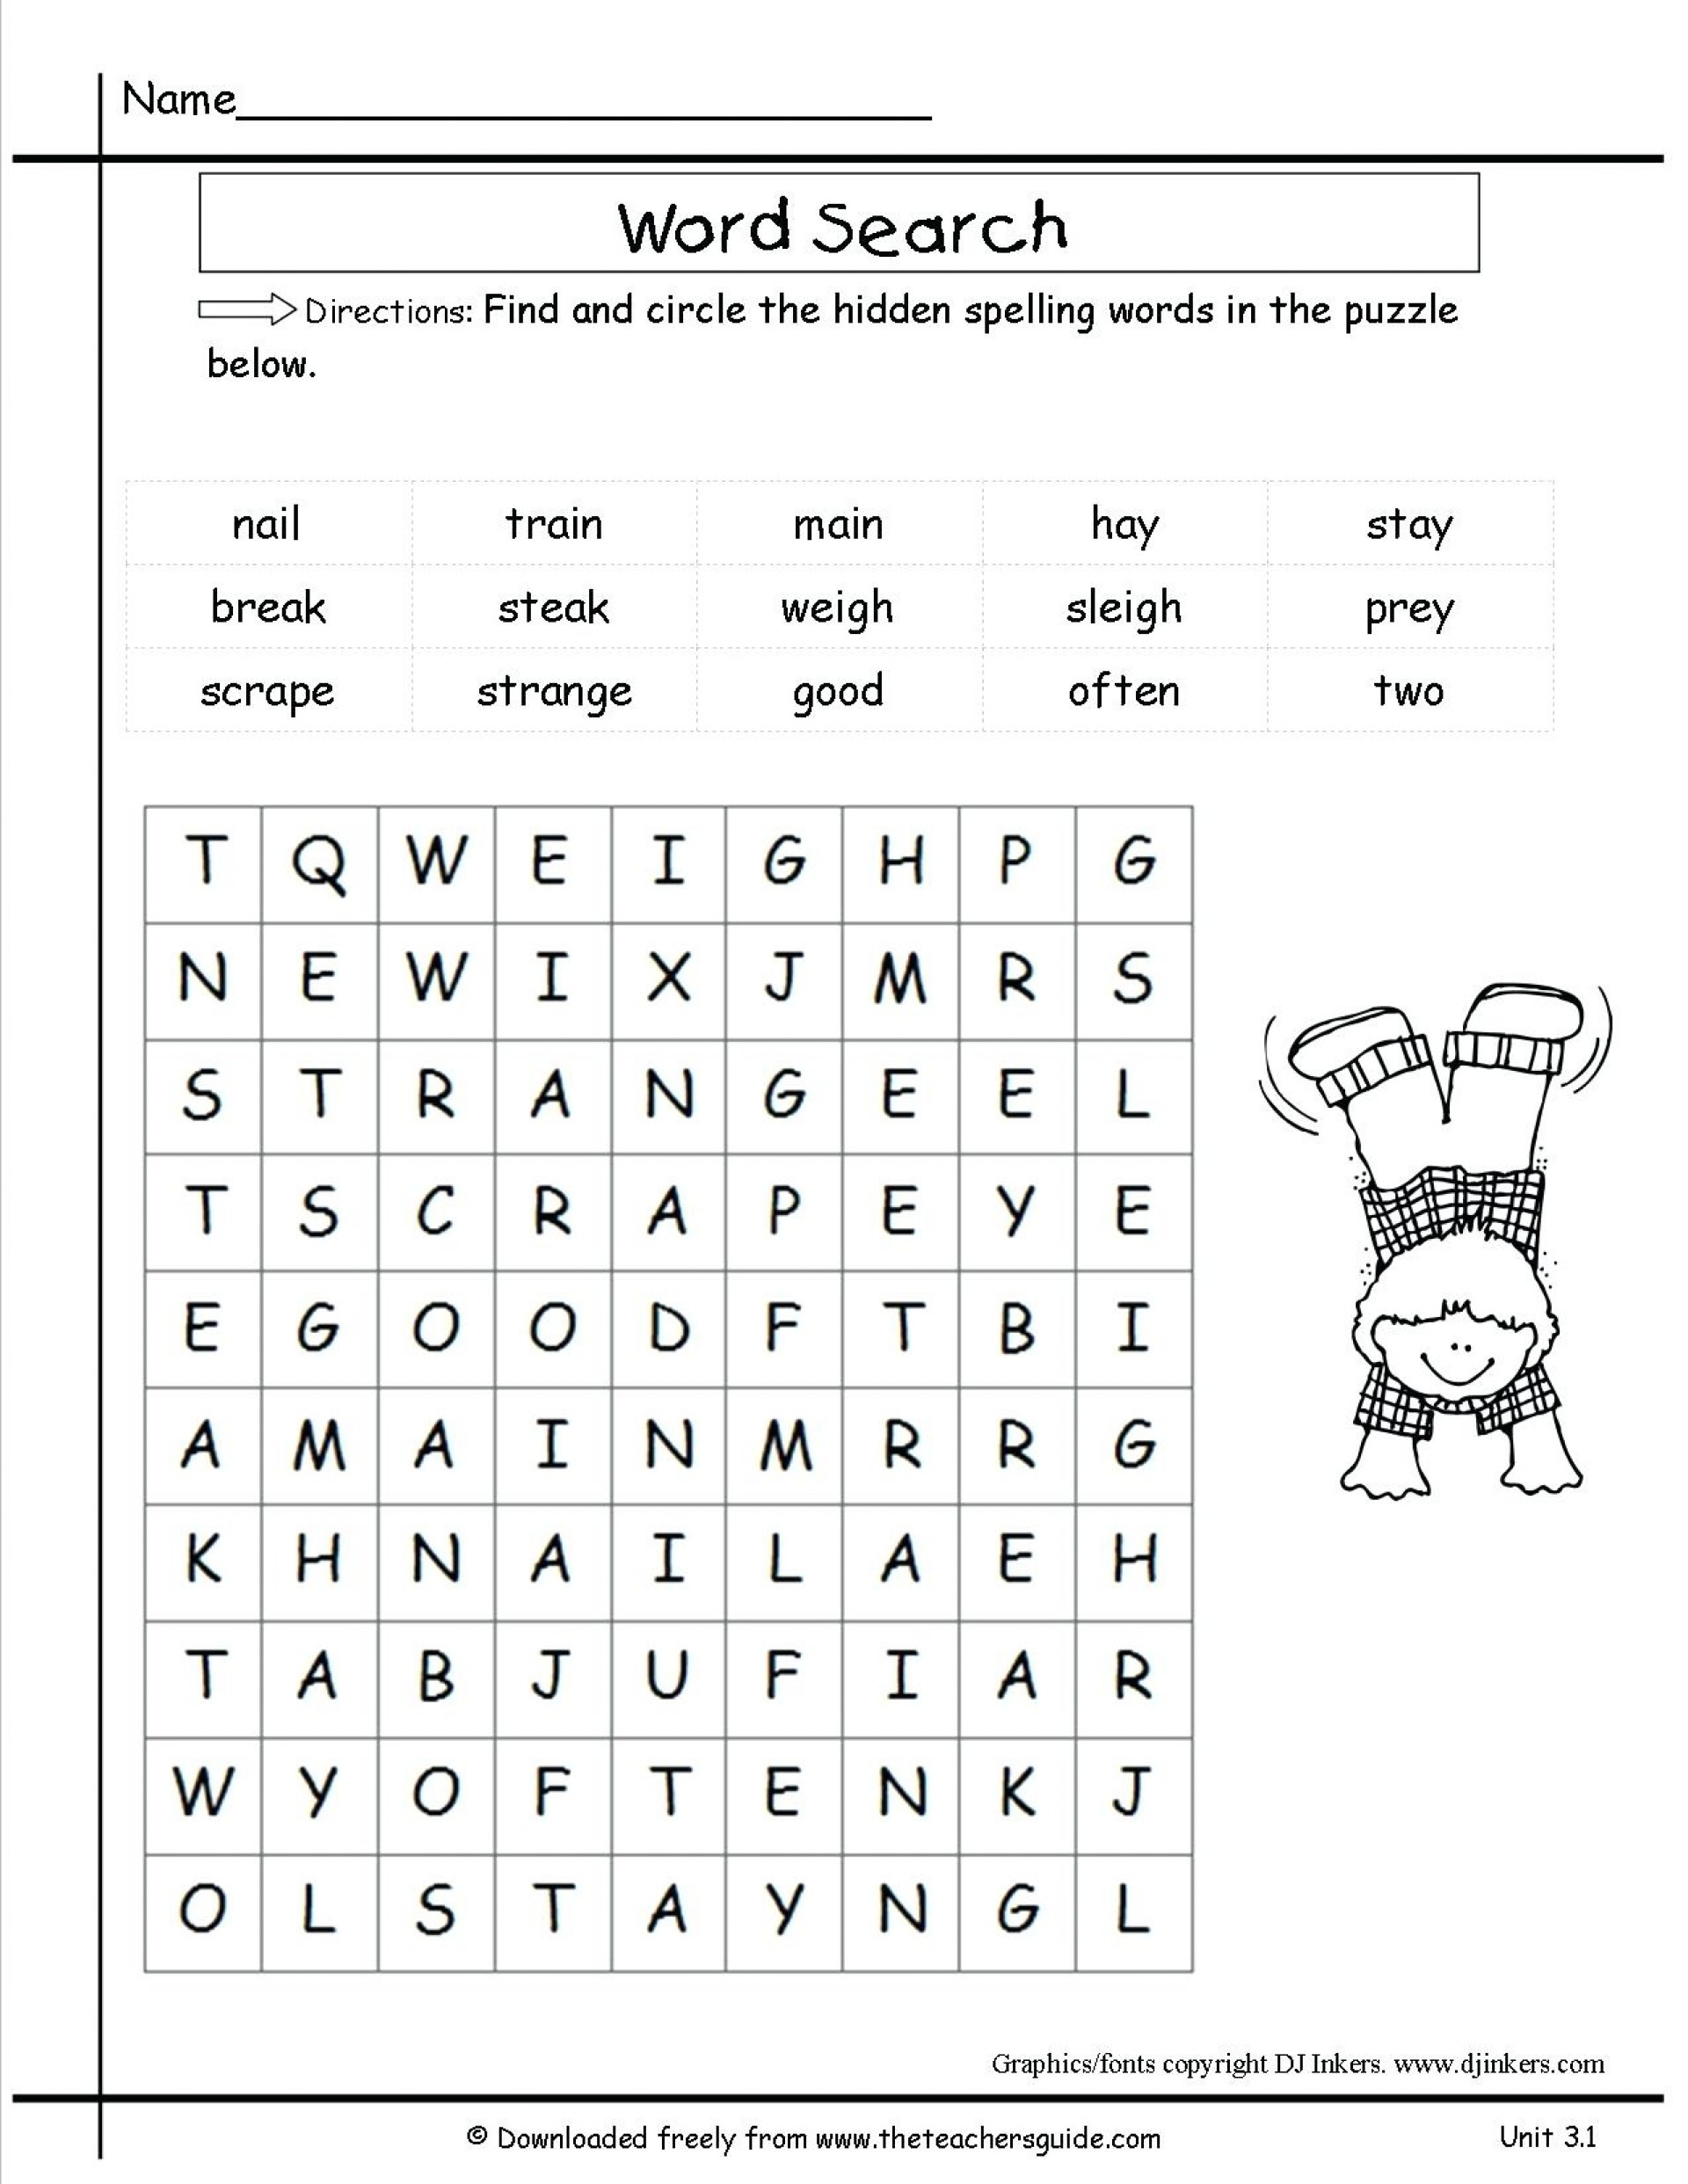 Free word search maker to print tastyfer